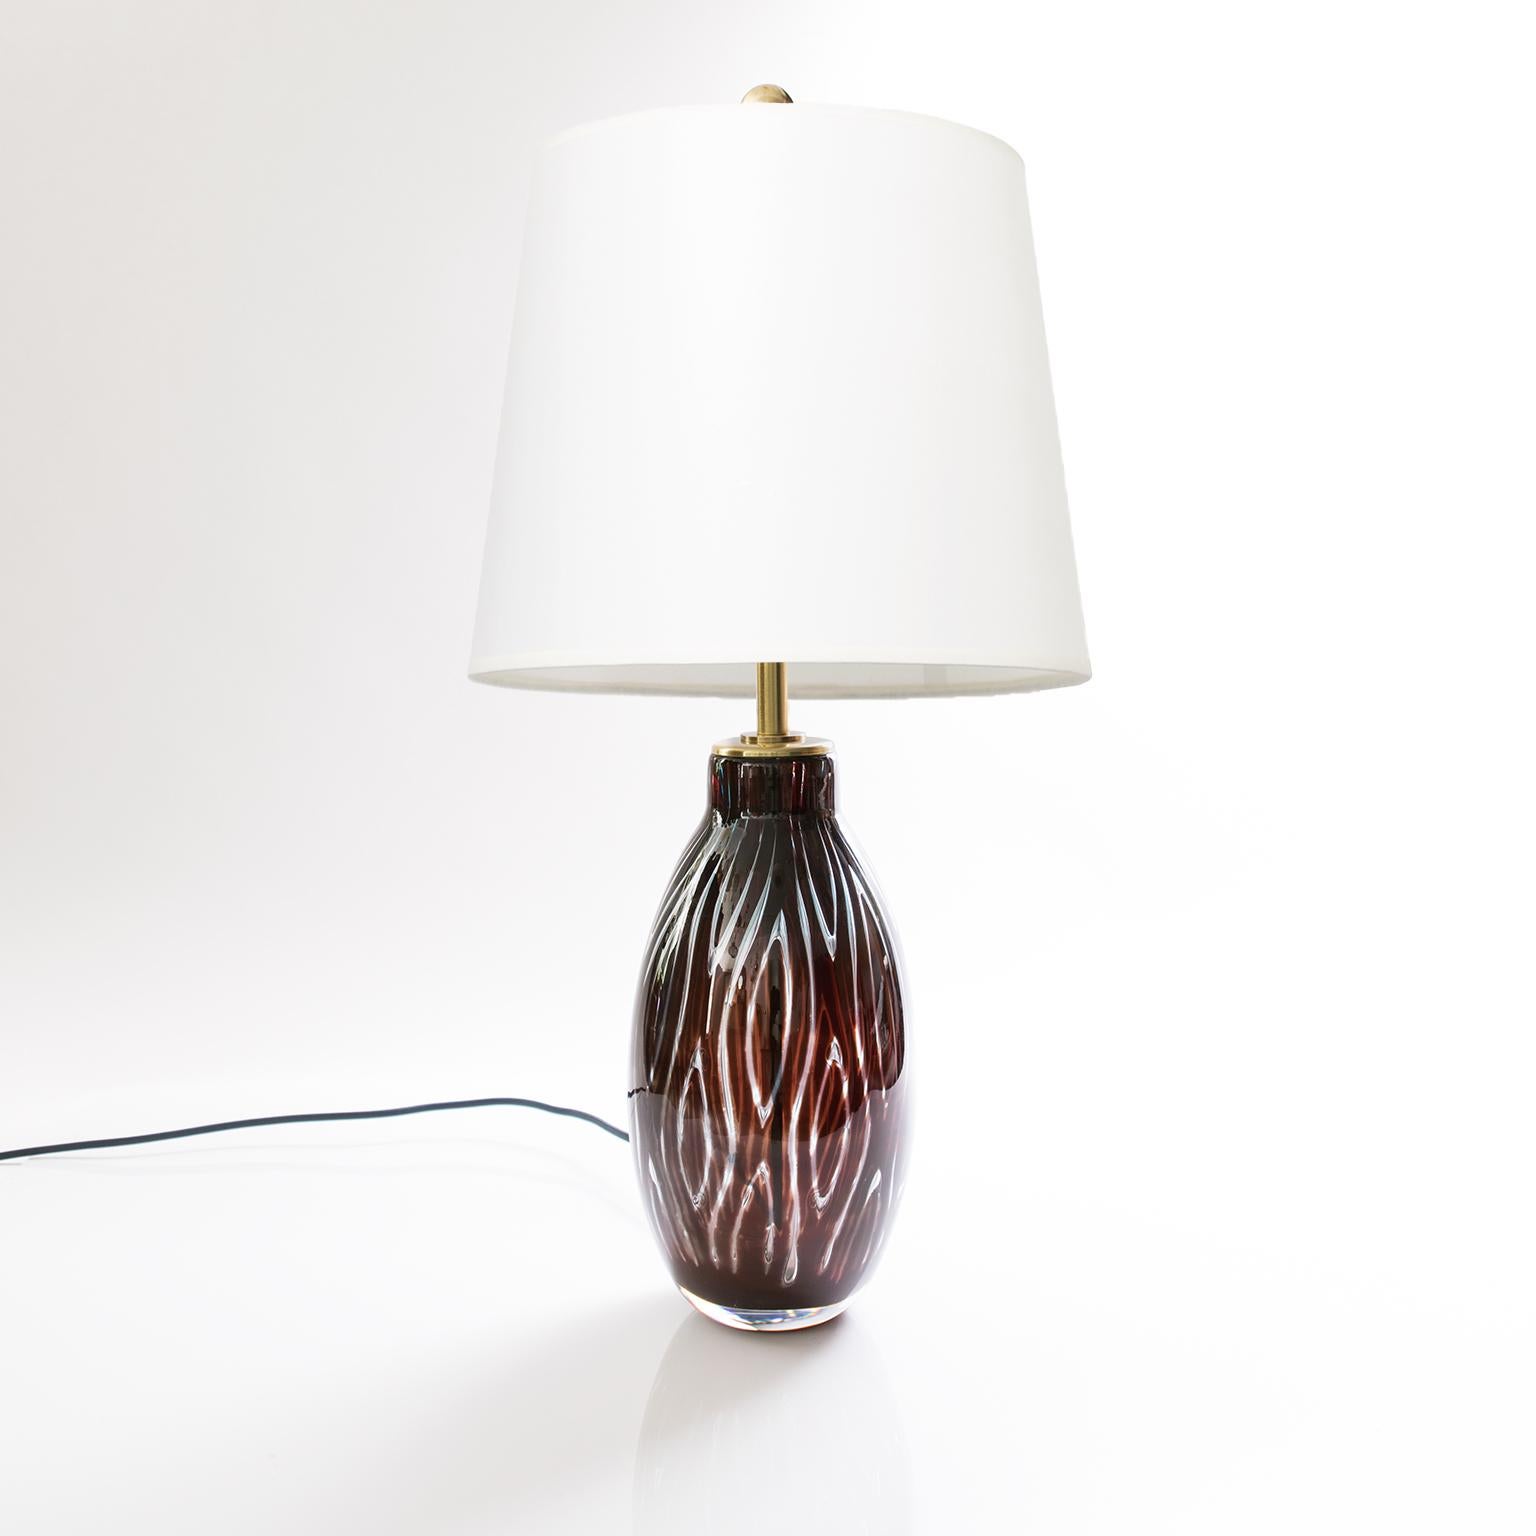 A Scandinavian Modern glass table lamp by Swedish designer Edvin Ohrstrom for Orrefors. The lamp was made using the 